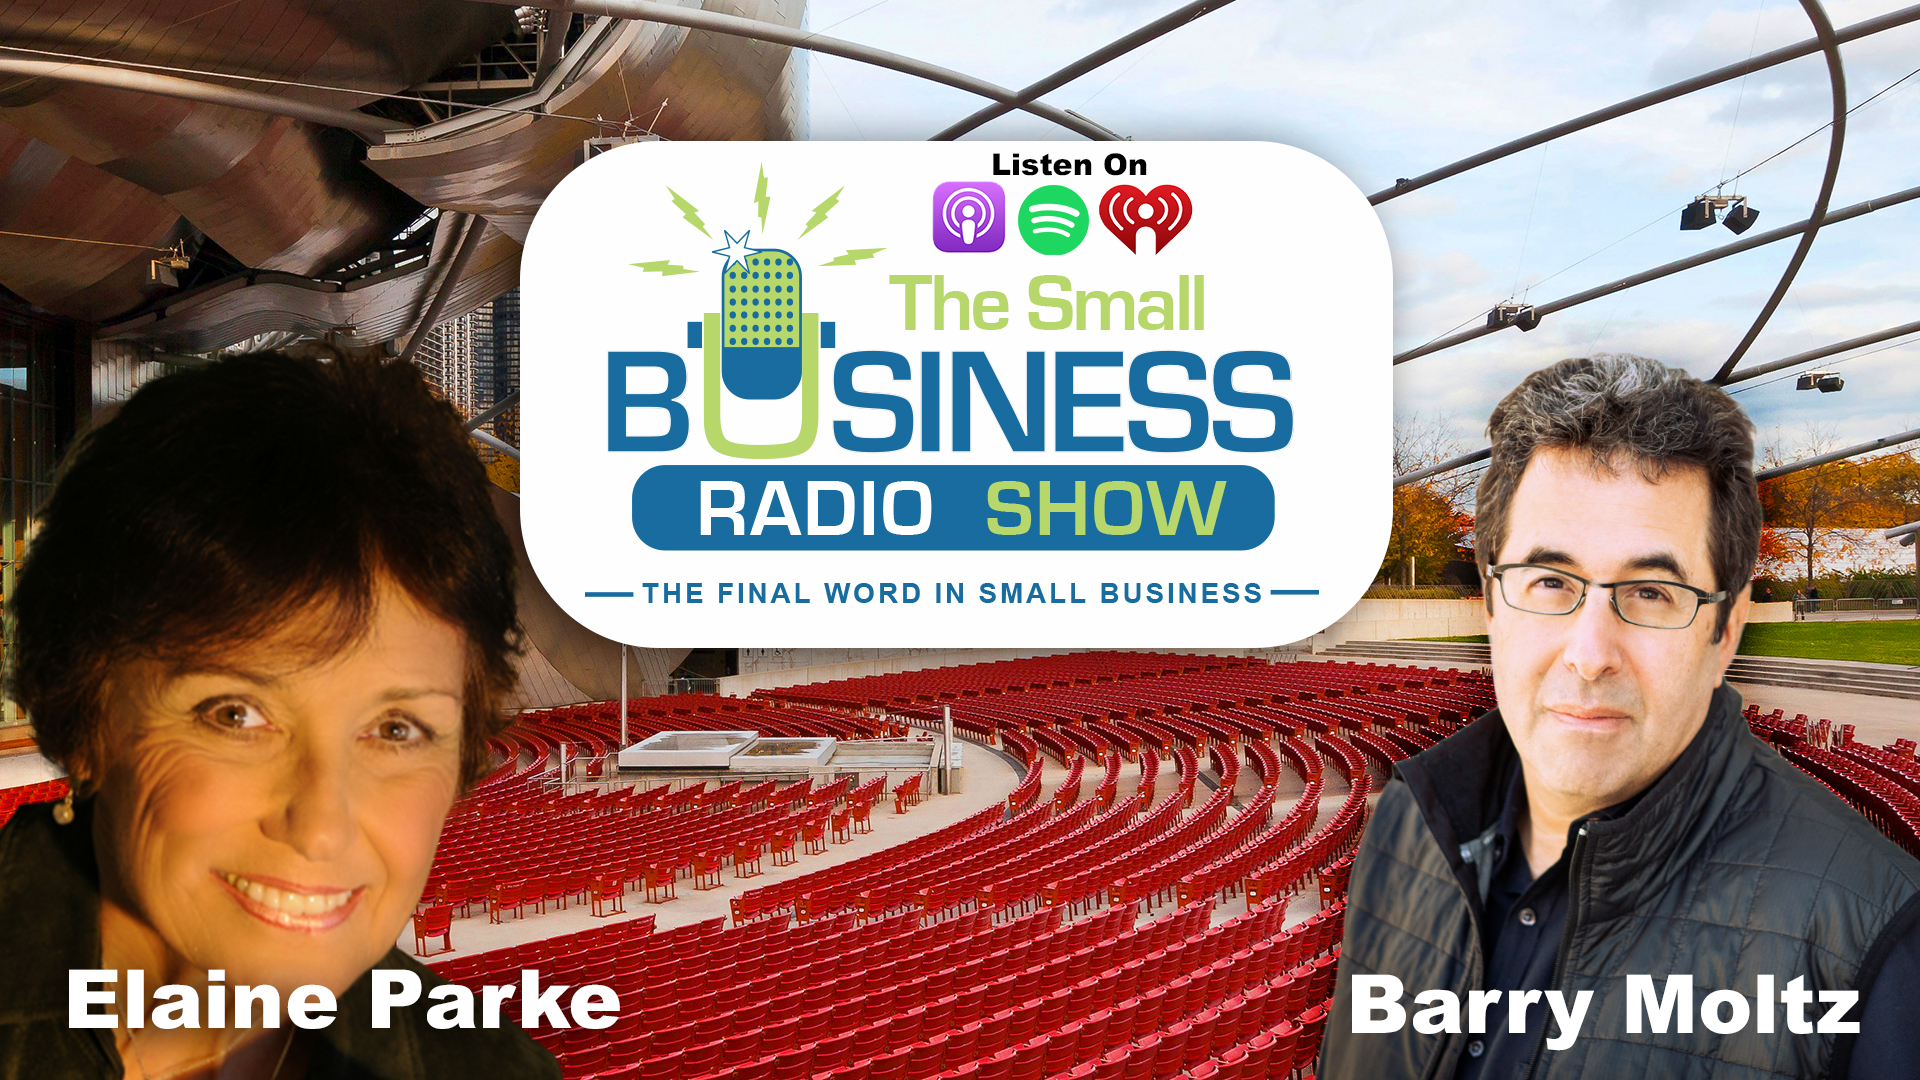 Elaine Parke on The Small Business Radio Show